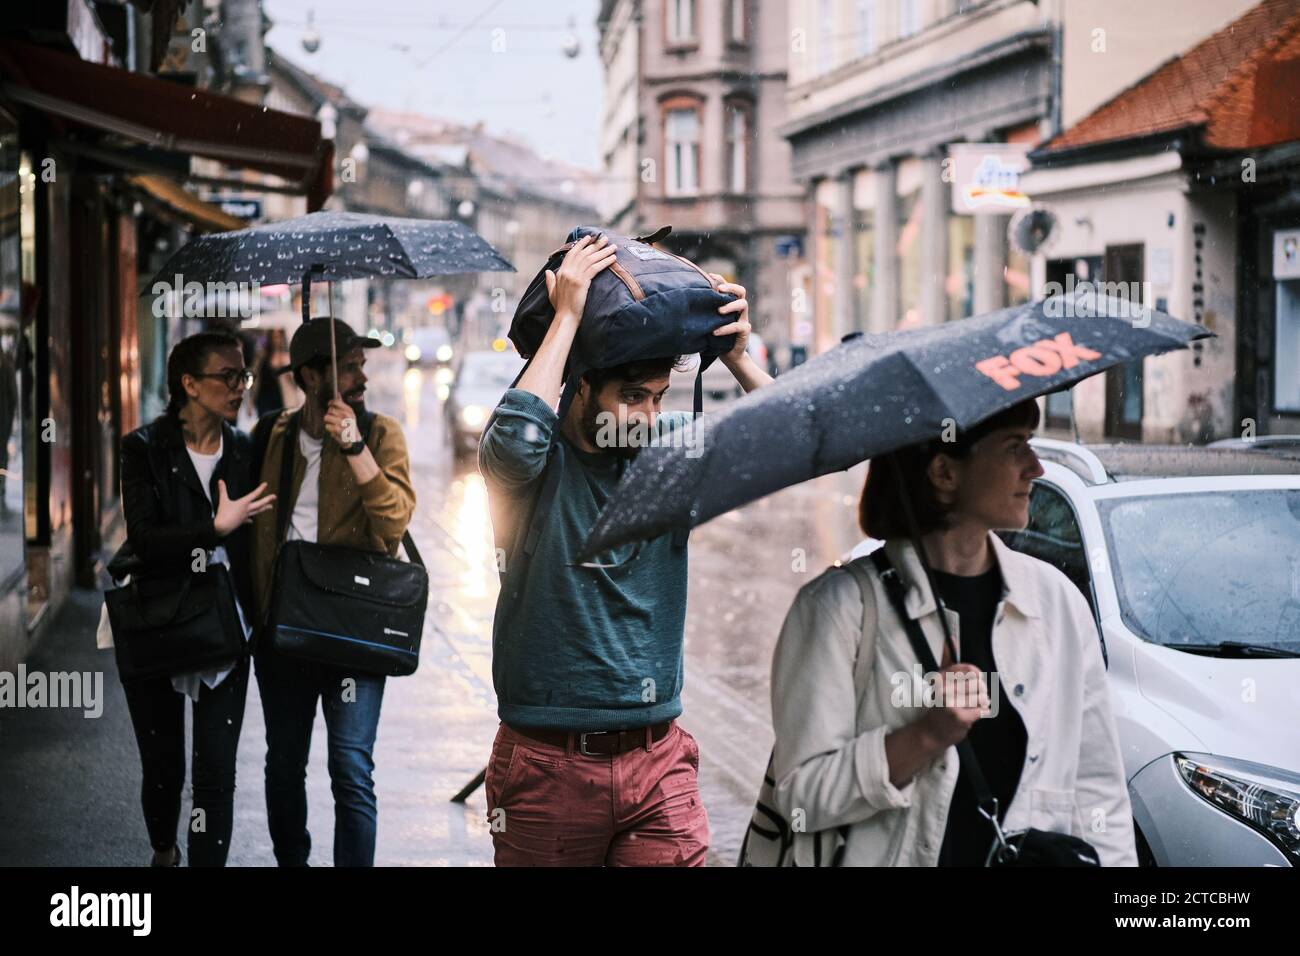 People on the streets of Zagreb during a rainy day, Croatia Stock Photo